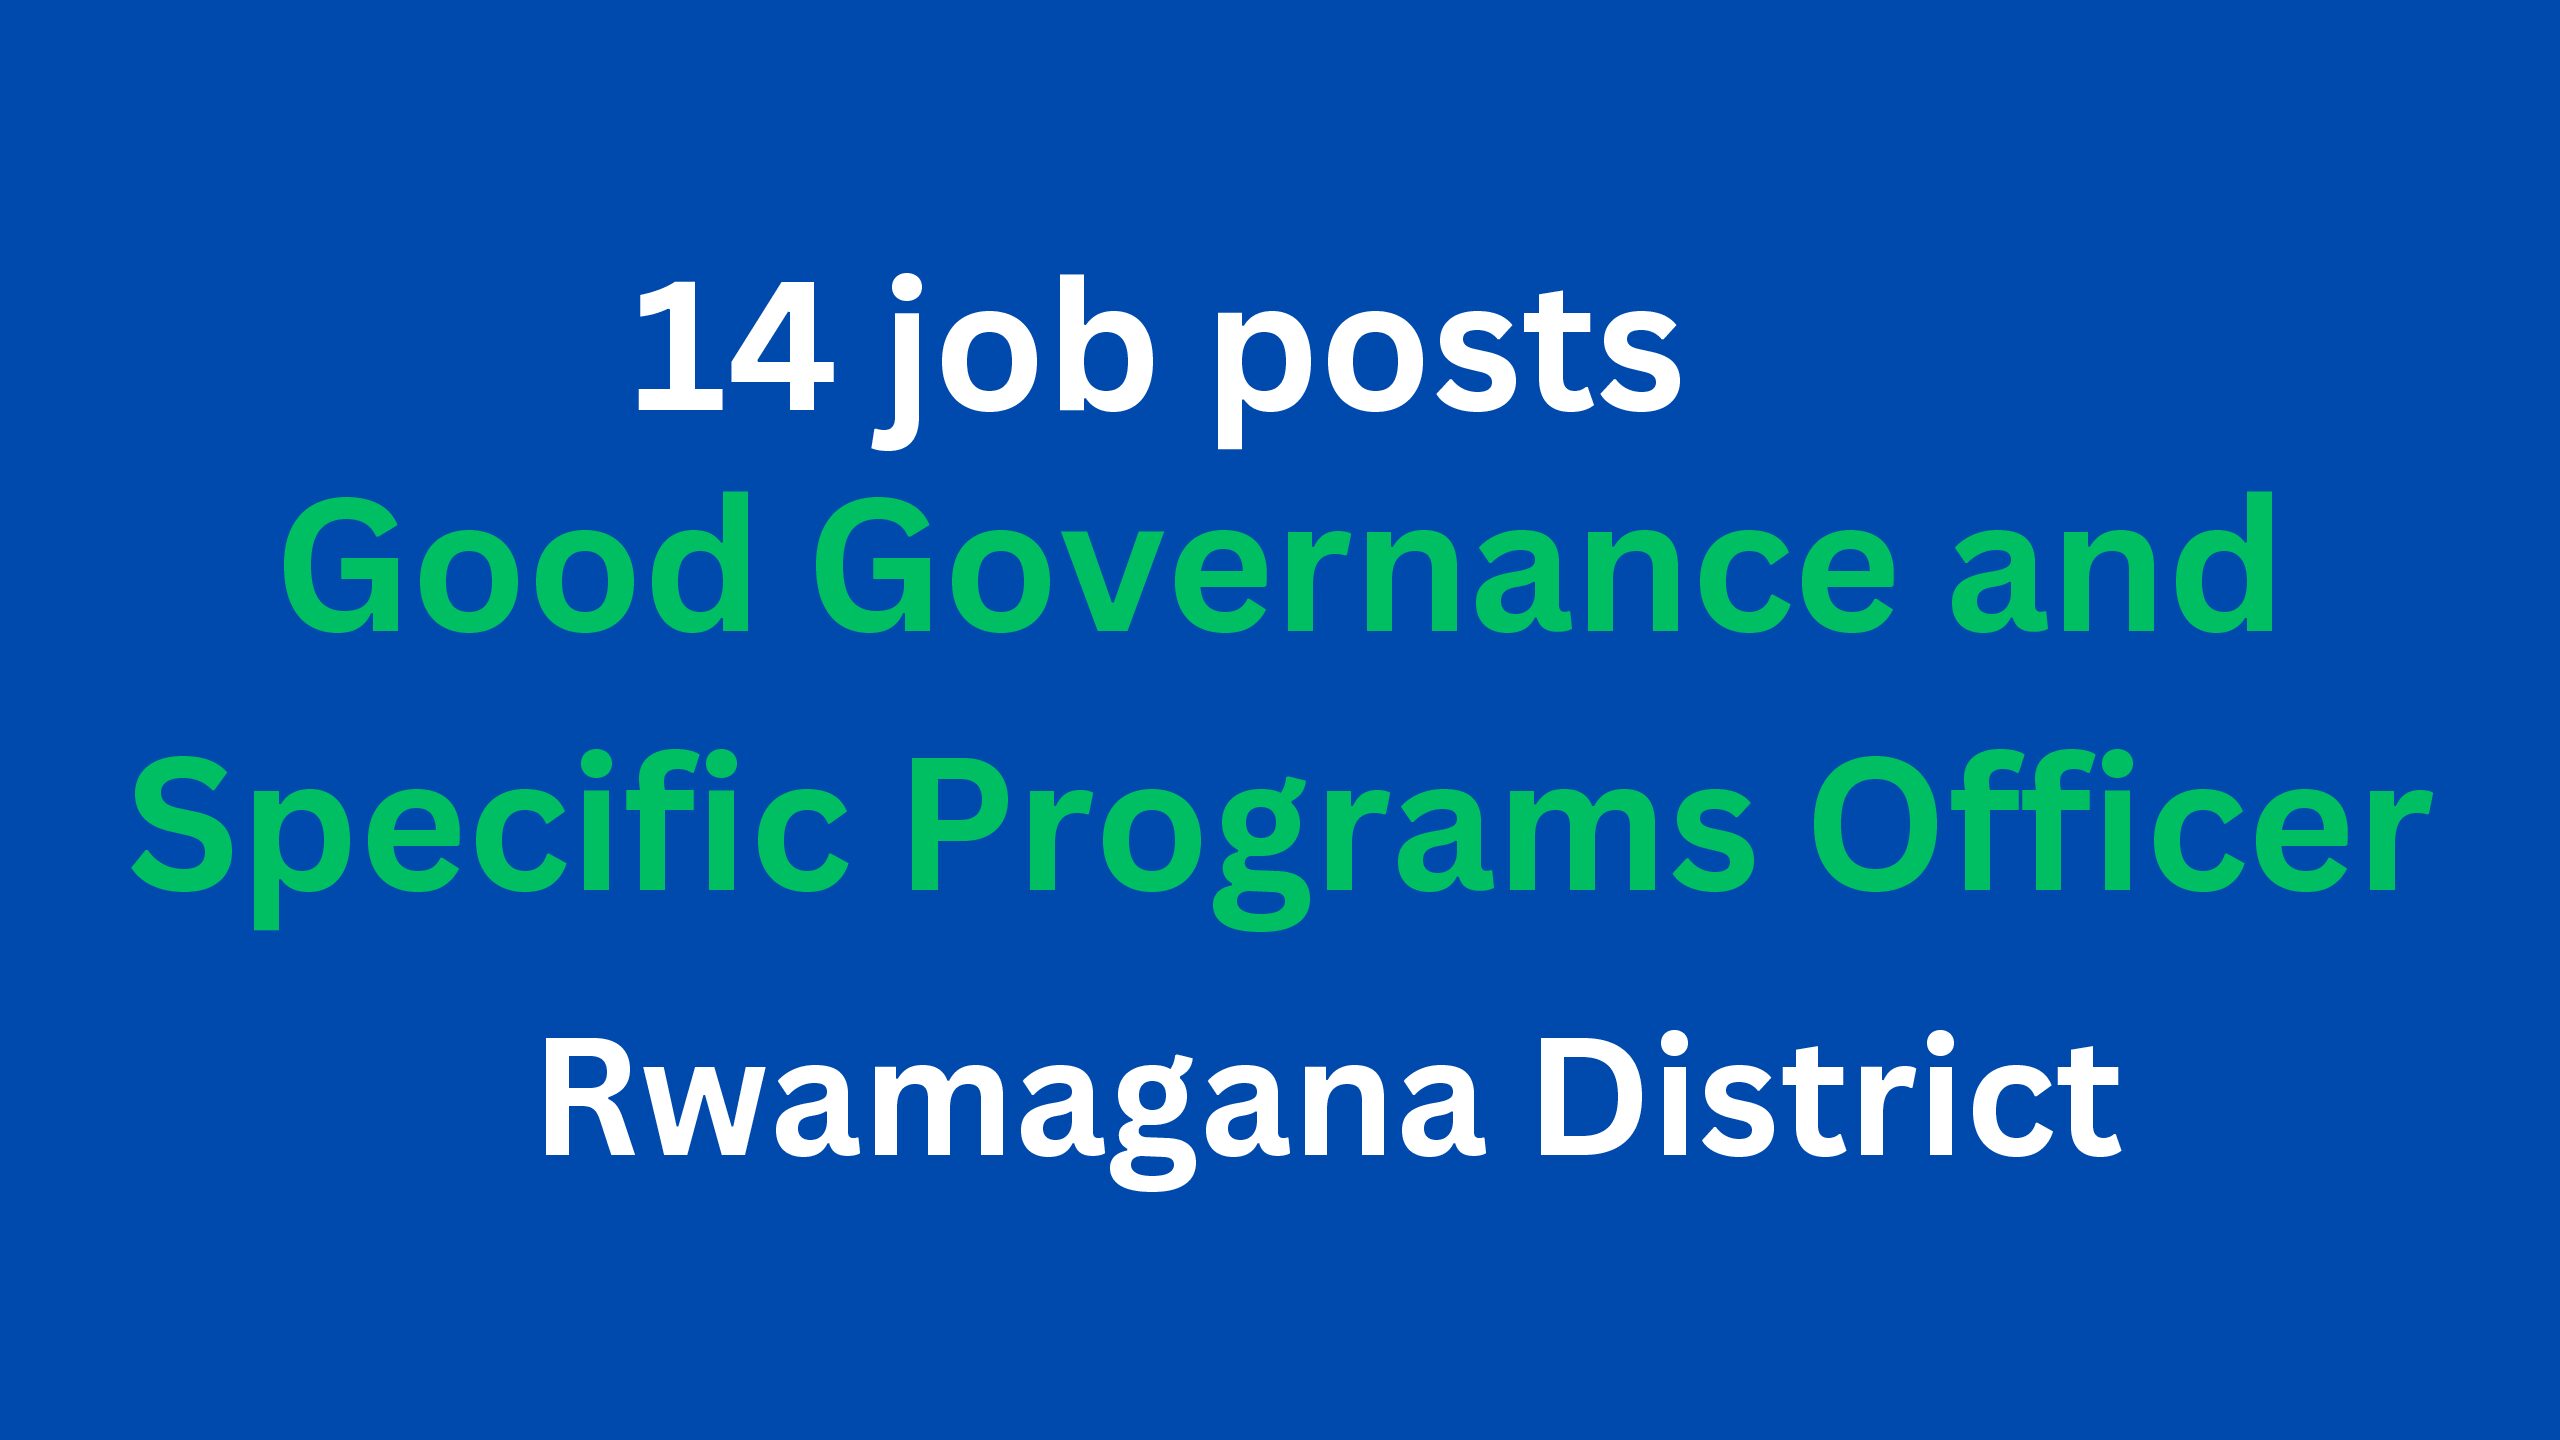 14 job posts of Good Governance and Specific Programs Officer at Rwamagana District